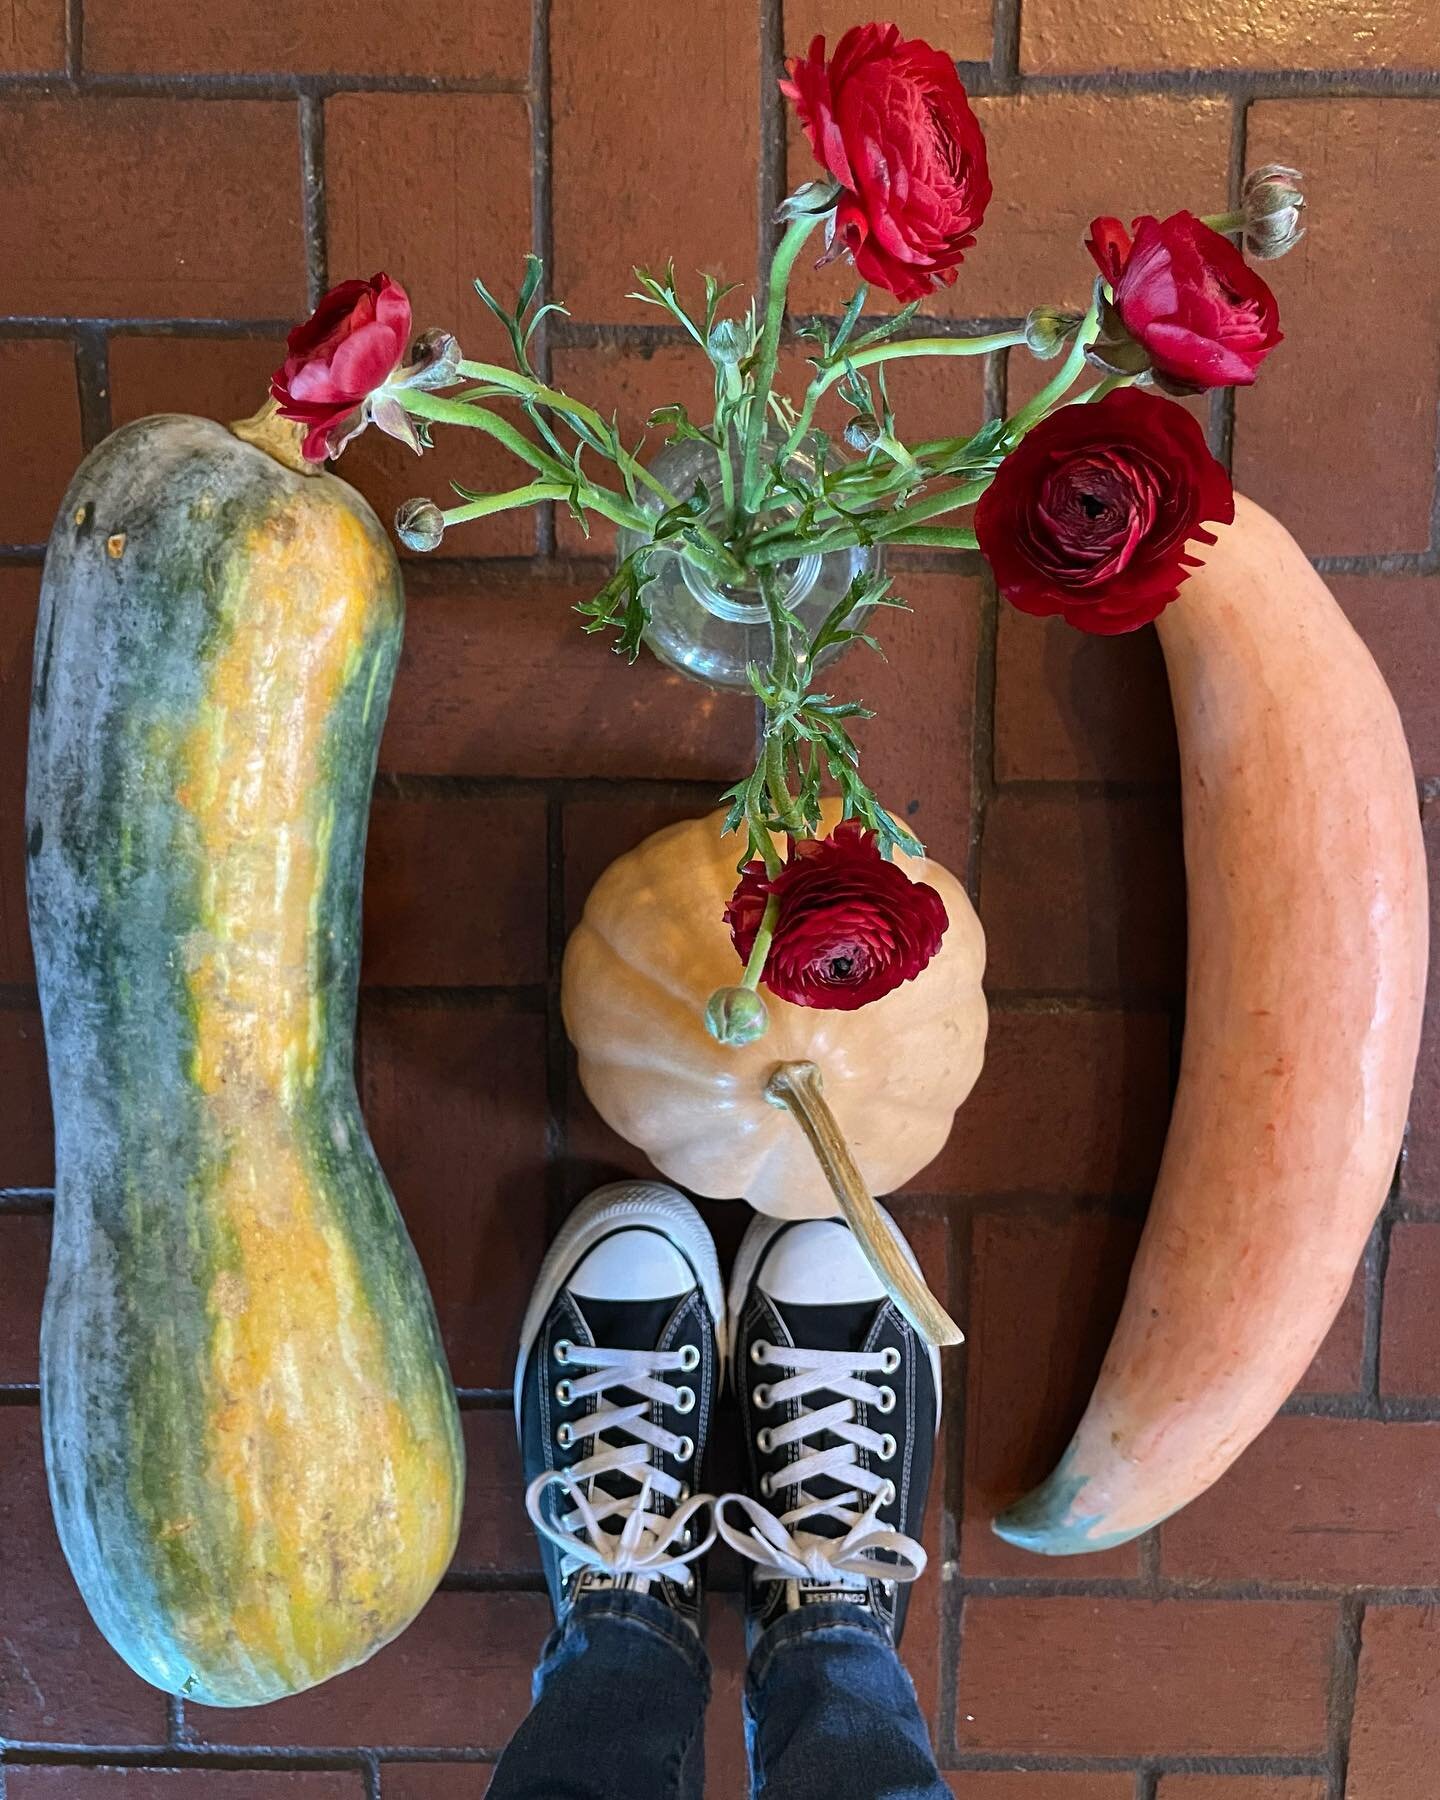 I&rsquo;m so glad we stopped by the @richlandparkfarmersmarket today - we will clearly be savoring this amazing lushness for a while!
Lunga di Napoli Winter Squash (from Naples)
Seminole Pumpkin
Candy Roaster Winter Squash
Ranunculus from @wholefoods